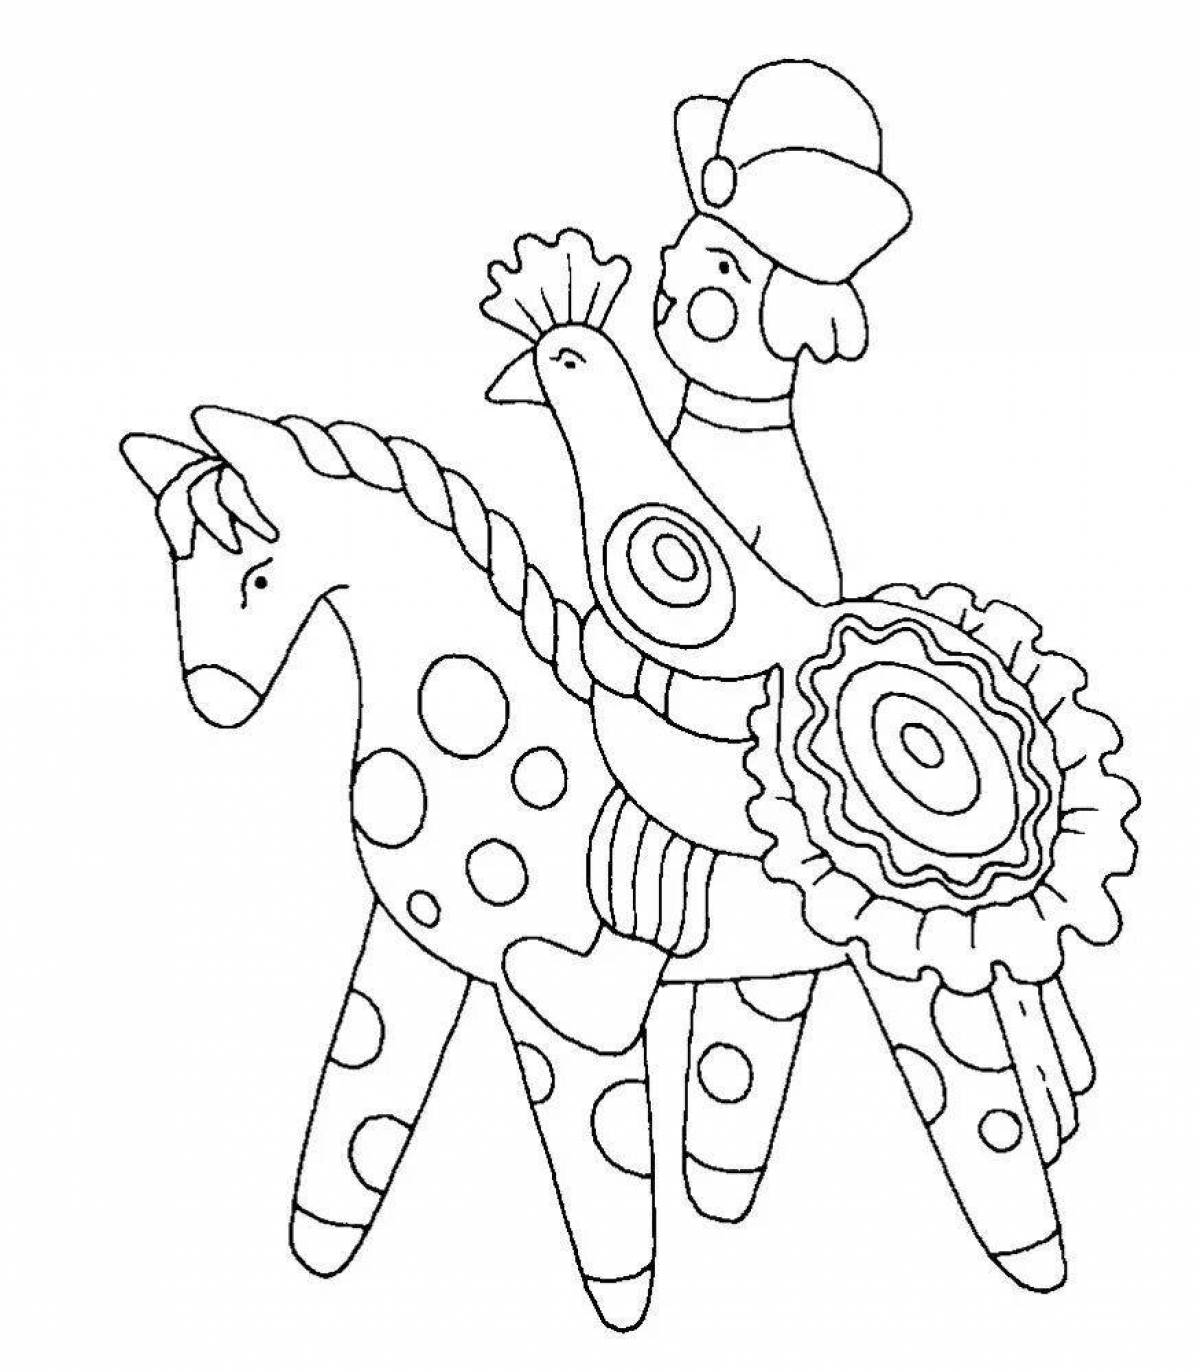 Bright Belarusian folk coloring toy